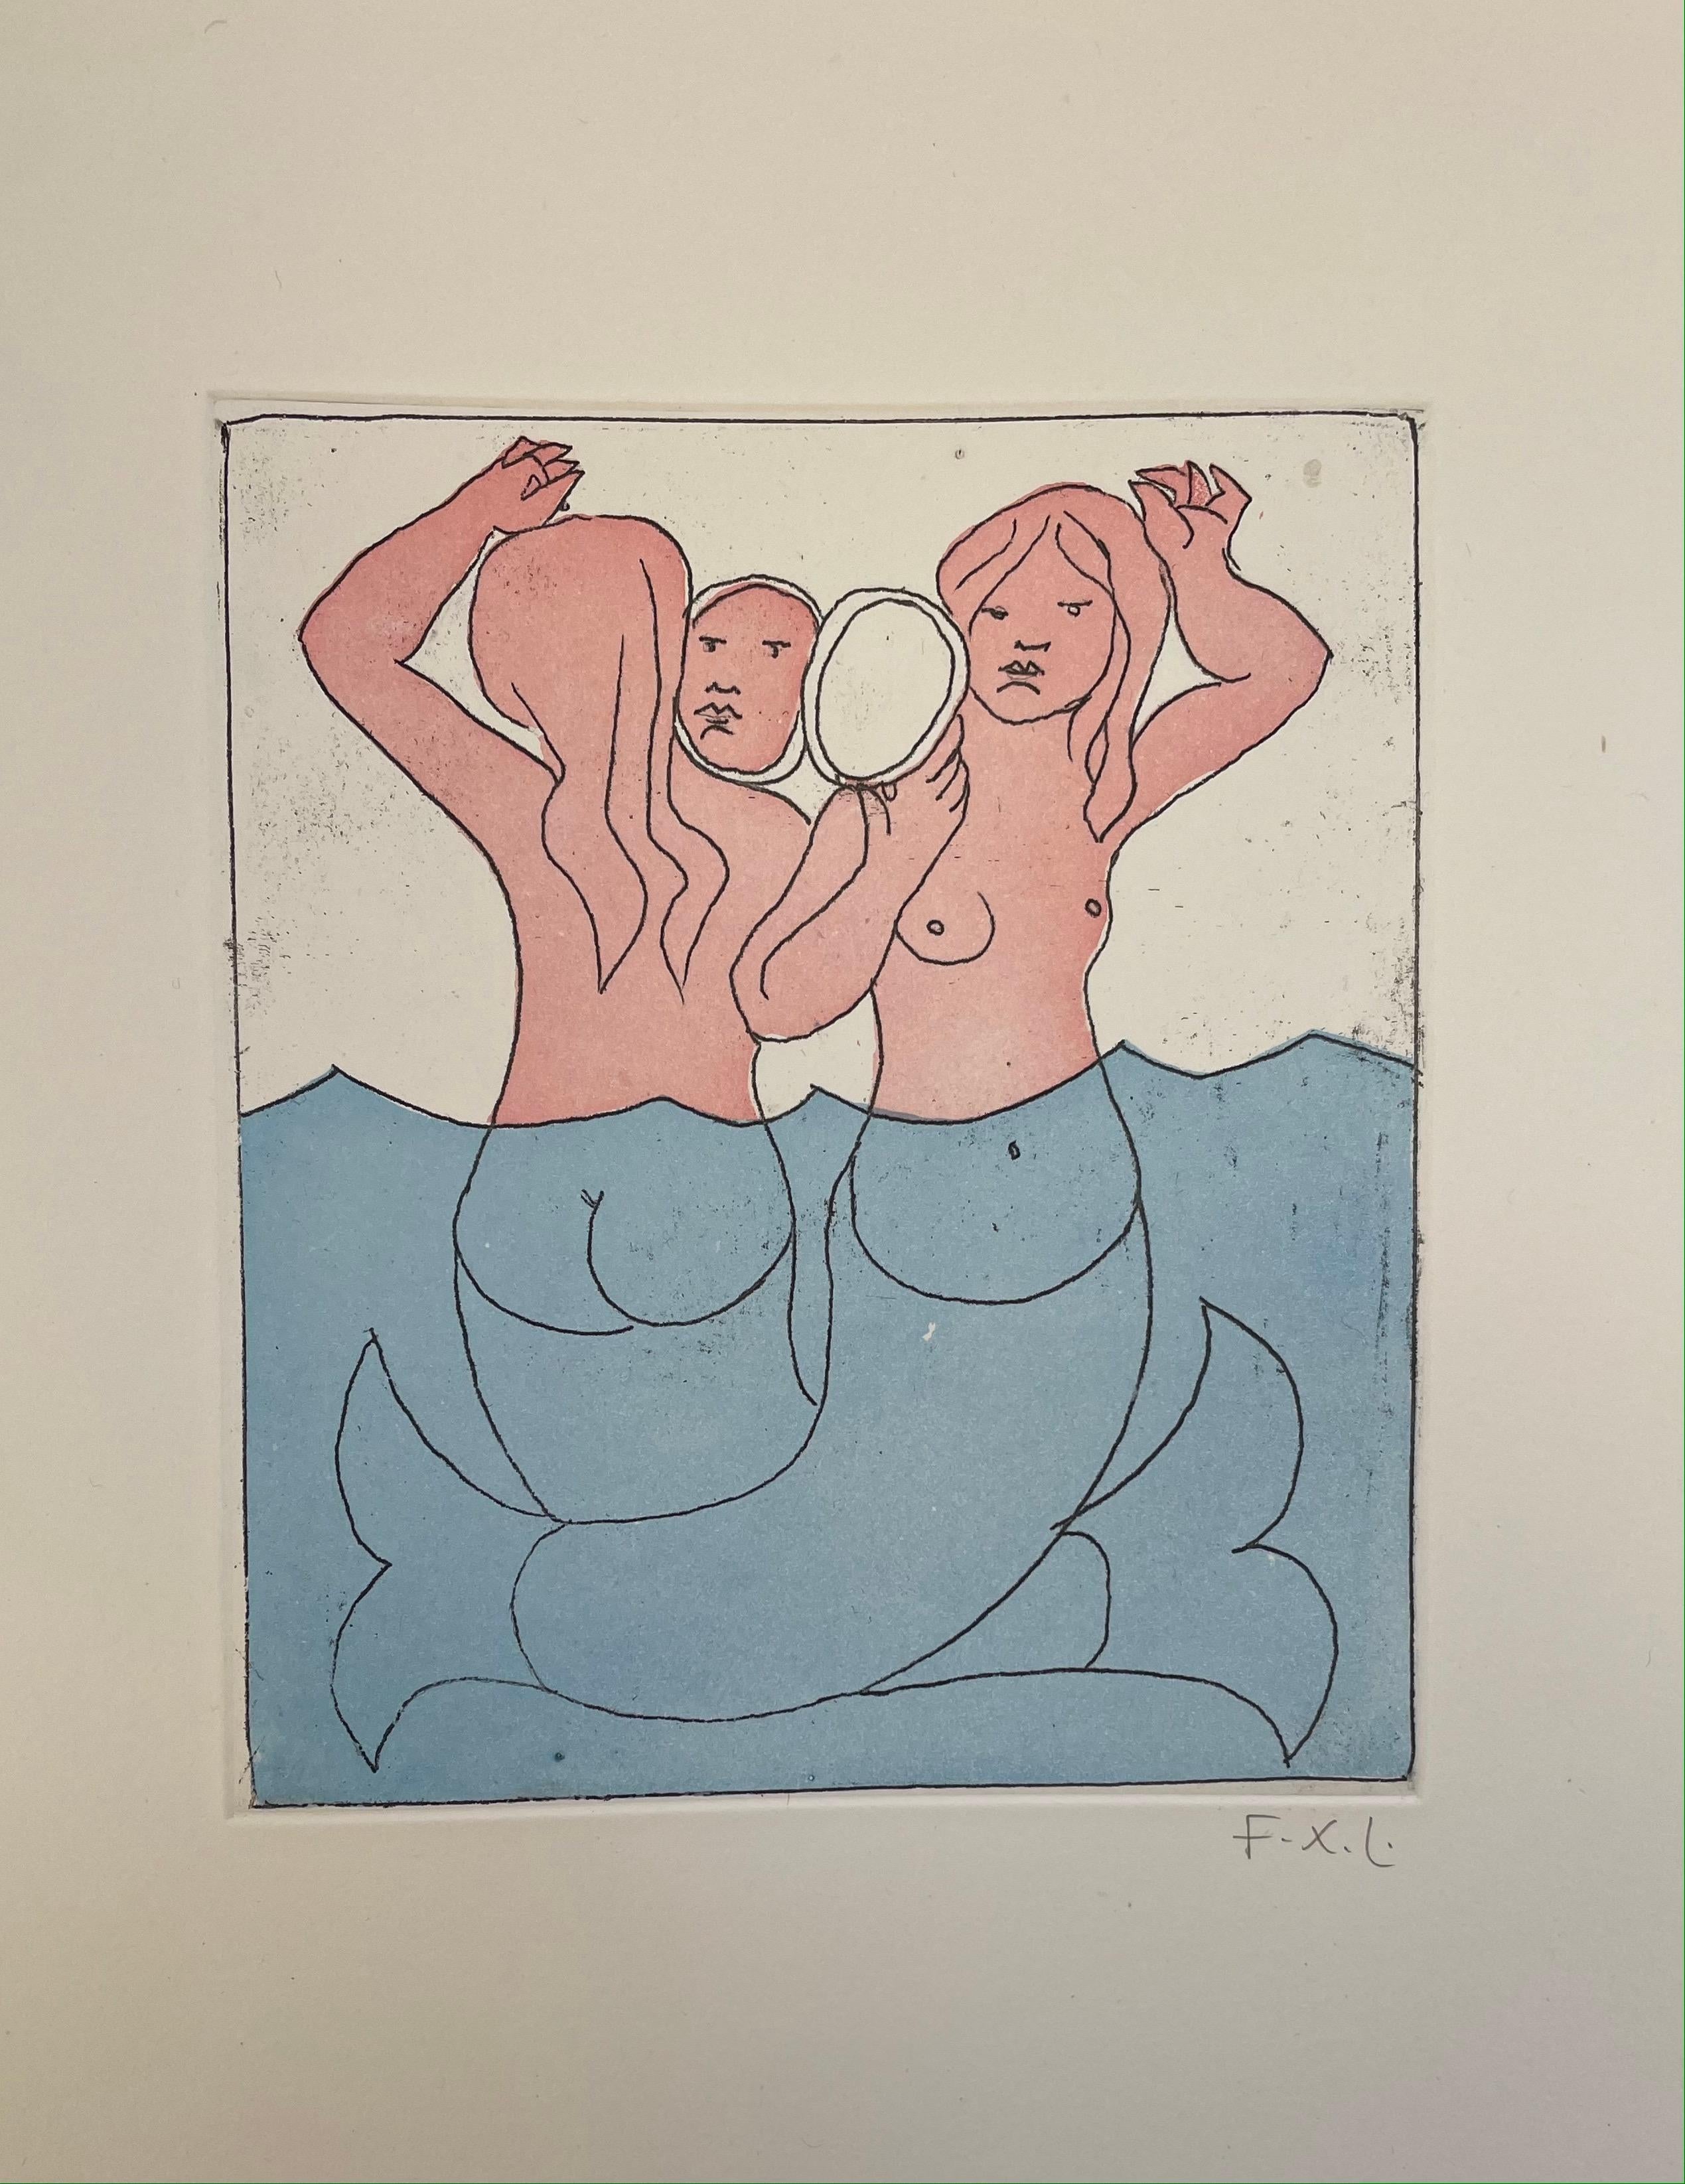 François-Xavier Lalanne (1927-2008) The Mermaids (les Néréides), 2005 
Techniques : aquatint and soft varnish on paper, hand signed in pencil by François Xavier Lalanne, in perfect condition 
Dimensions of the paper : 38 x 28 cm (14,96 x 11 inches)